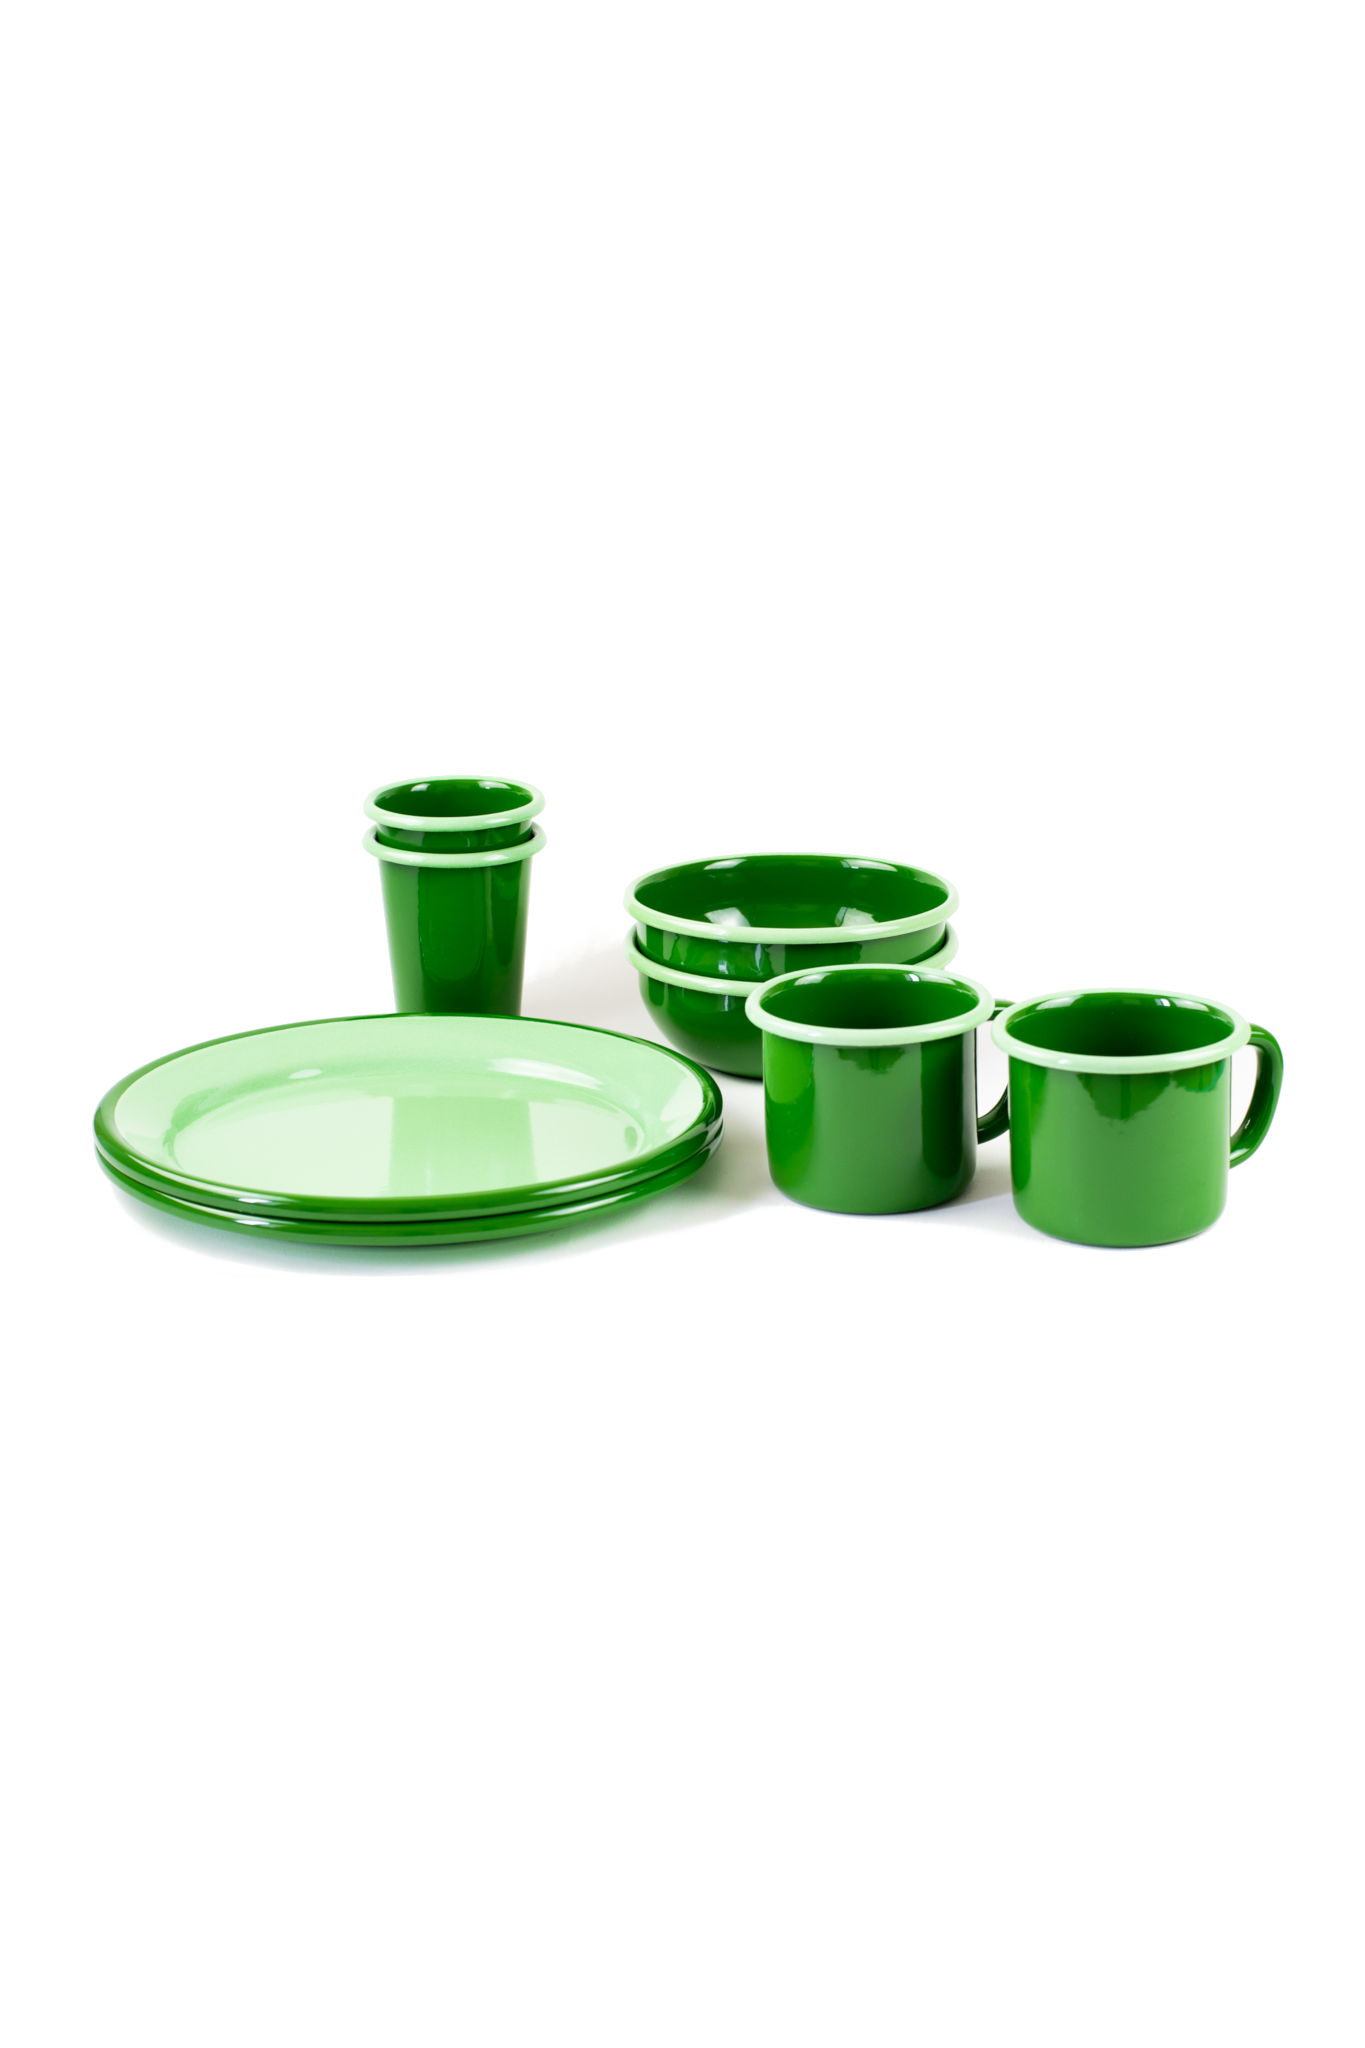 mugs-email-verres-assiettes-bols-verts-Setduo-SOLID